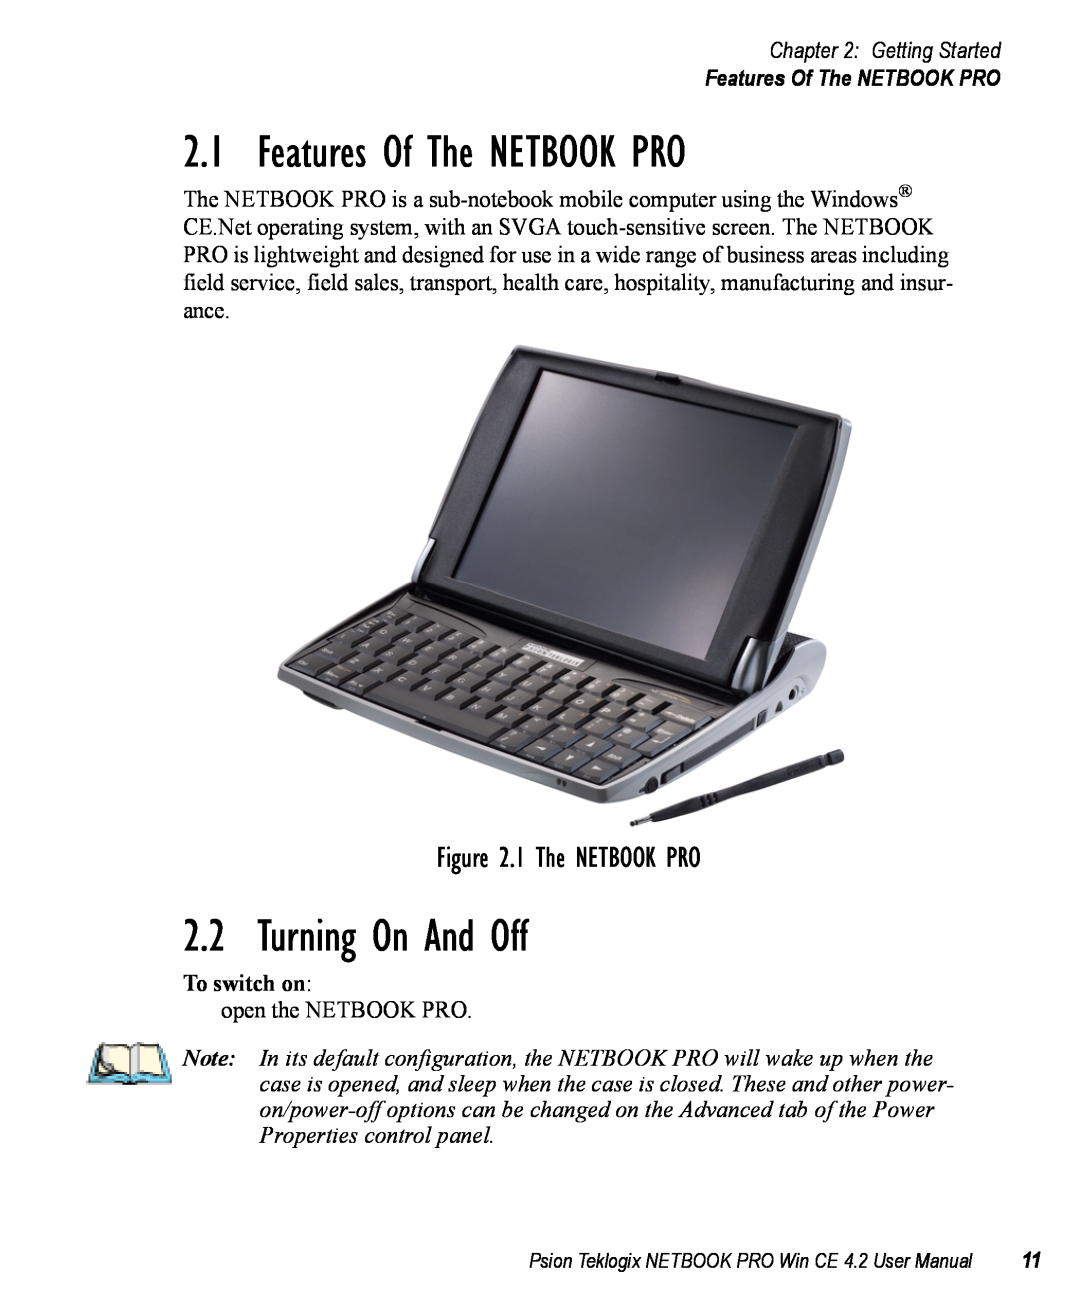 Psion Teklogix Win CE 4.2 user manual Features Of The NETBOOK PRO, Turning On And Off, 1 The NETBOOK PRO, Getting Started 